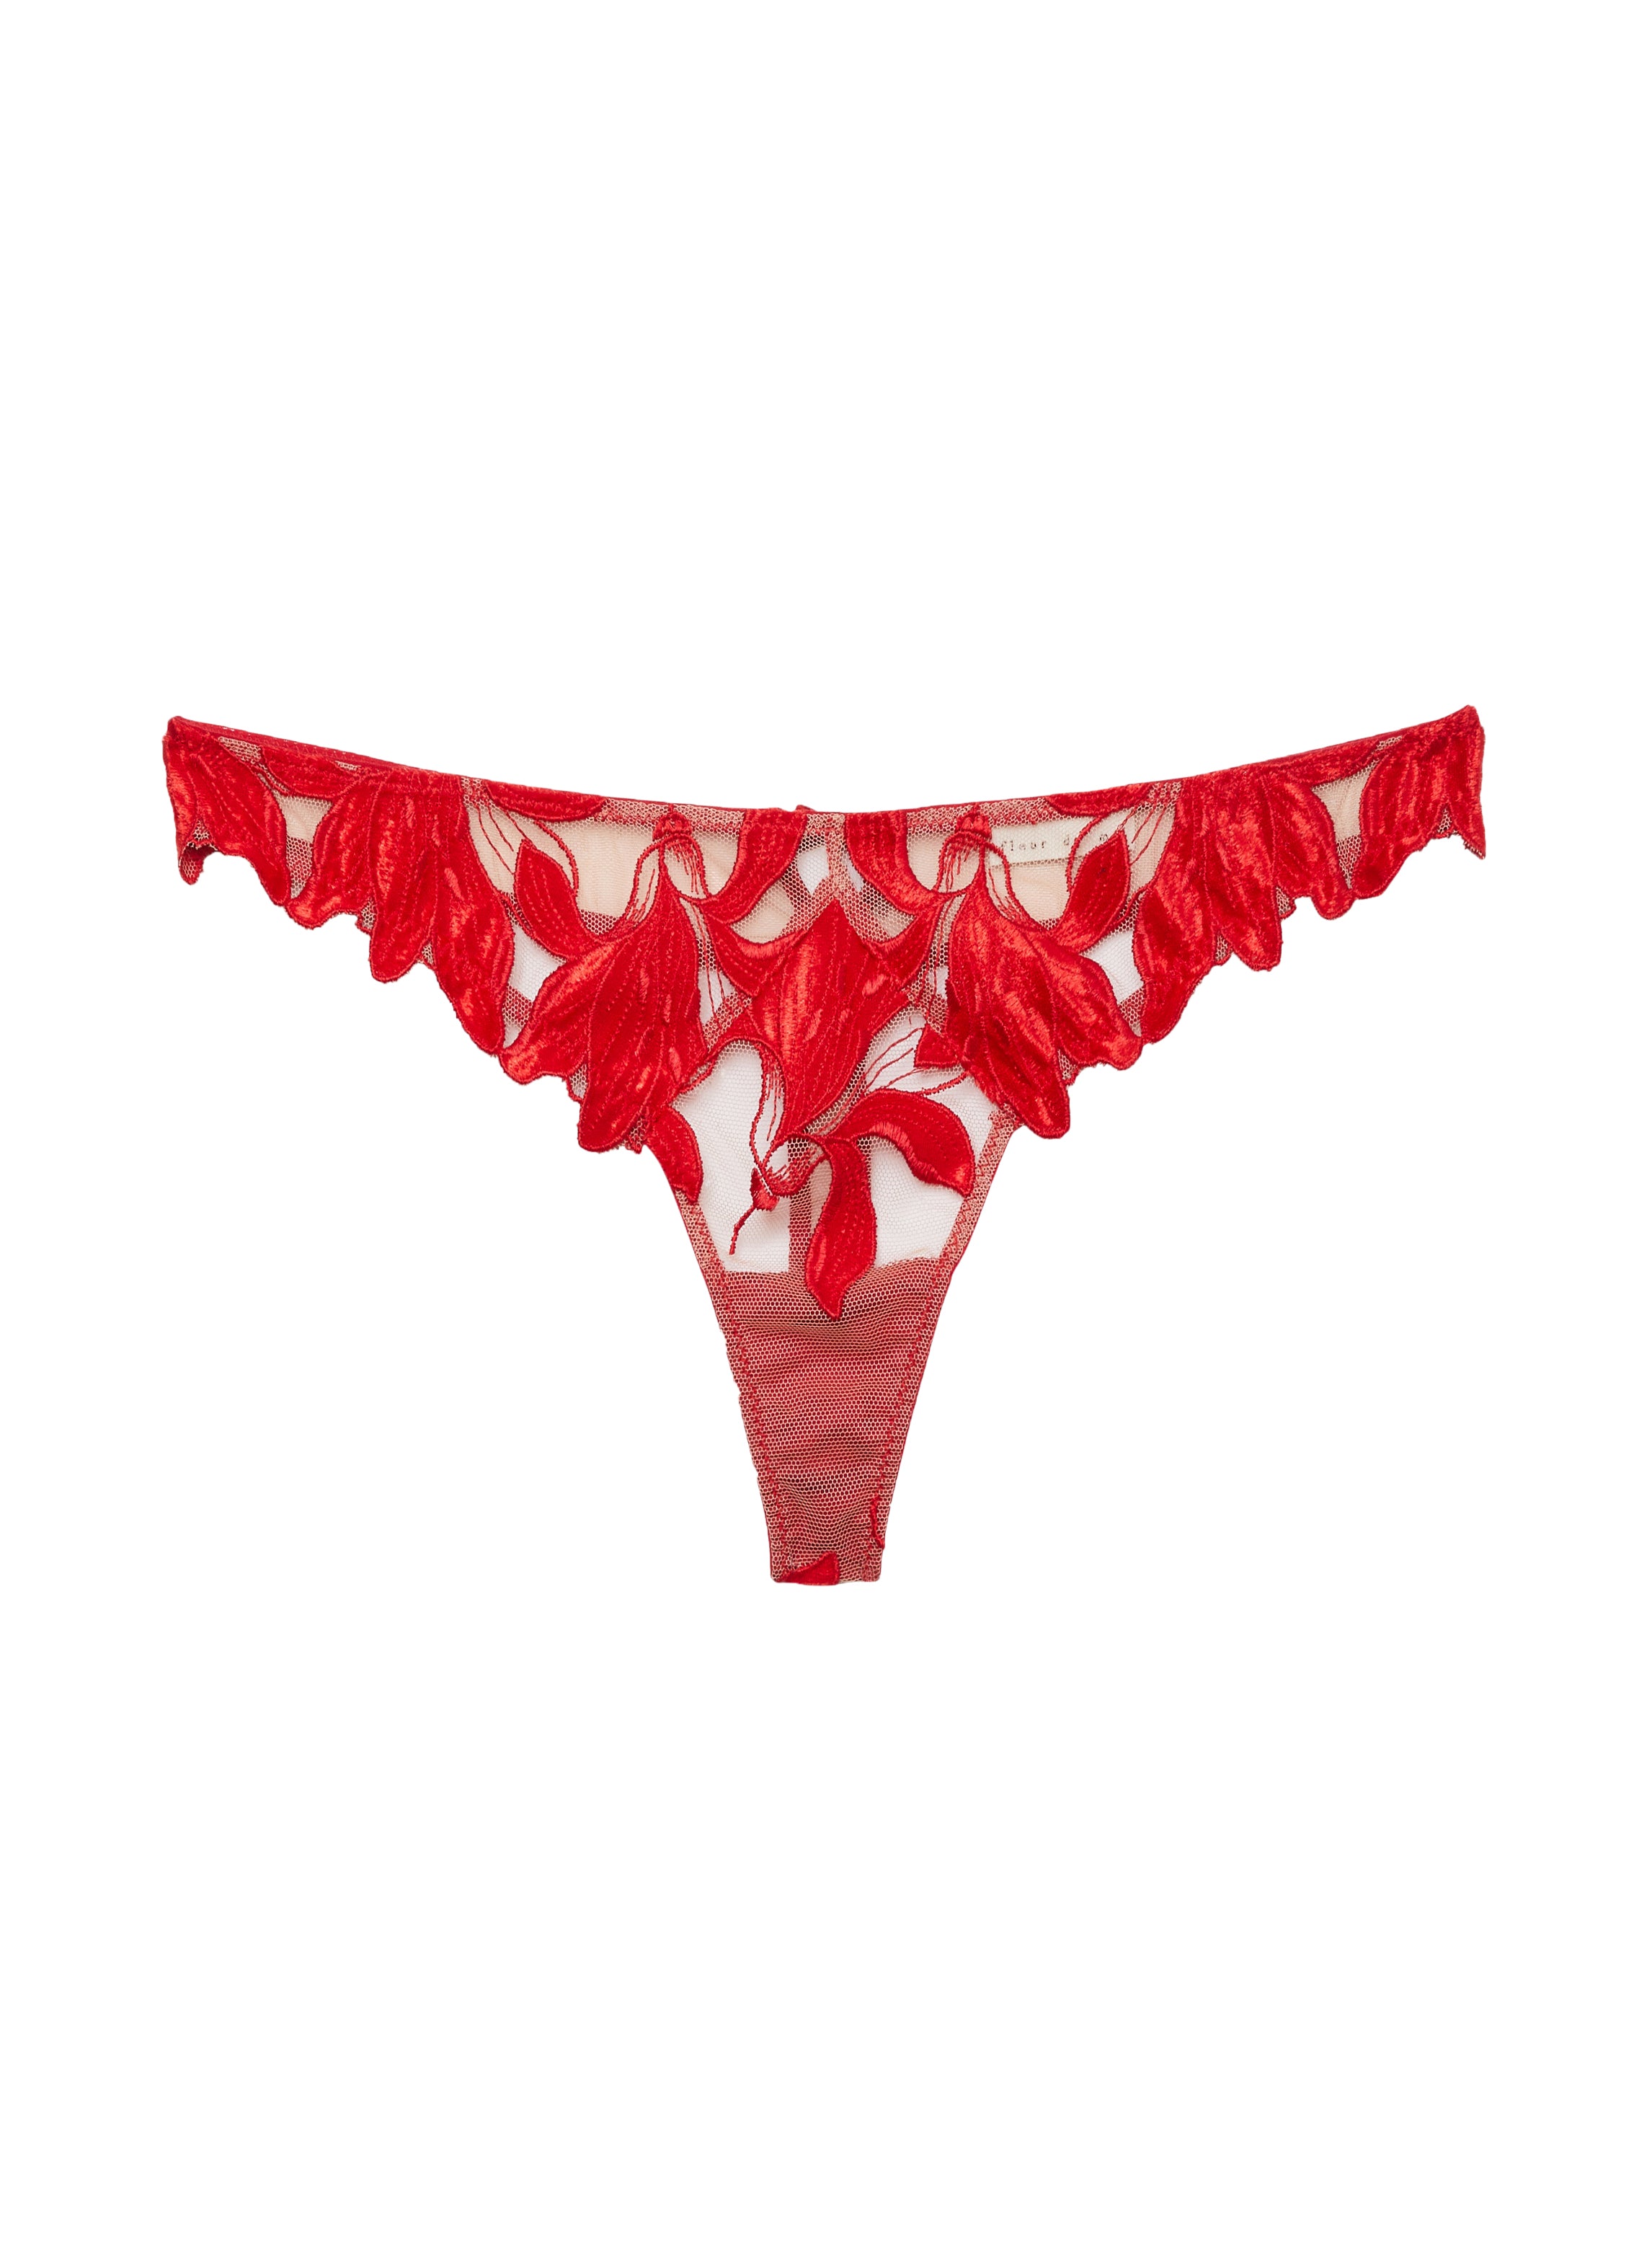 Lily Embroidery Hipster Thong by Fleur du Mal at ORCHARD MILE